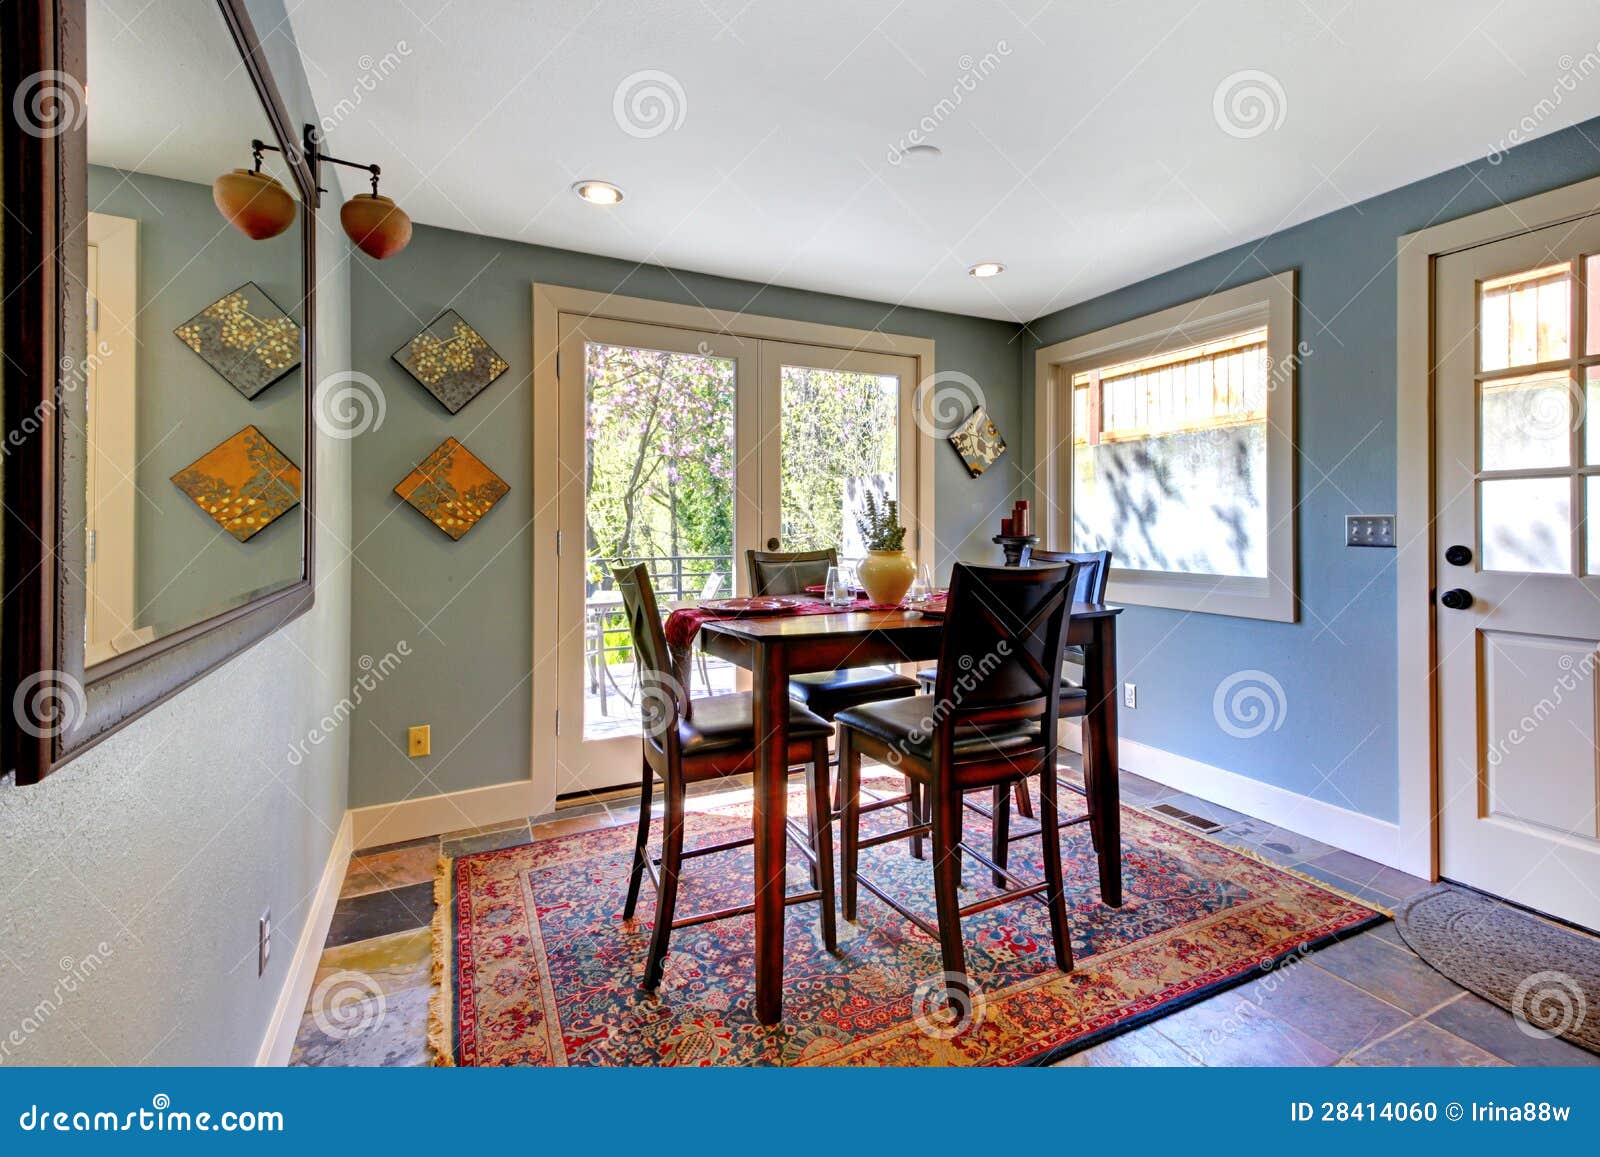 Blue Dining Room With Red Rug And High Table. Stock Photo ...